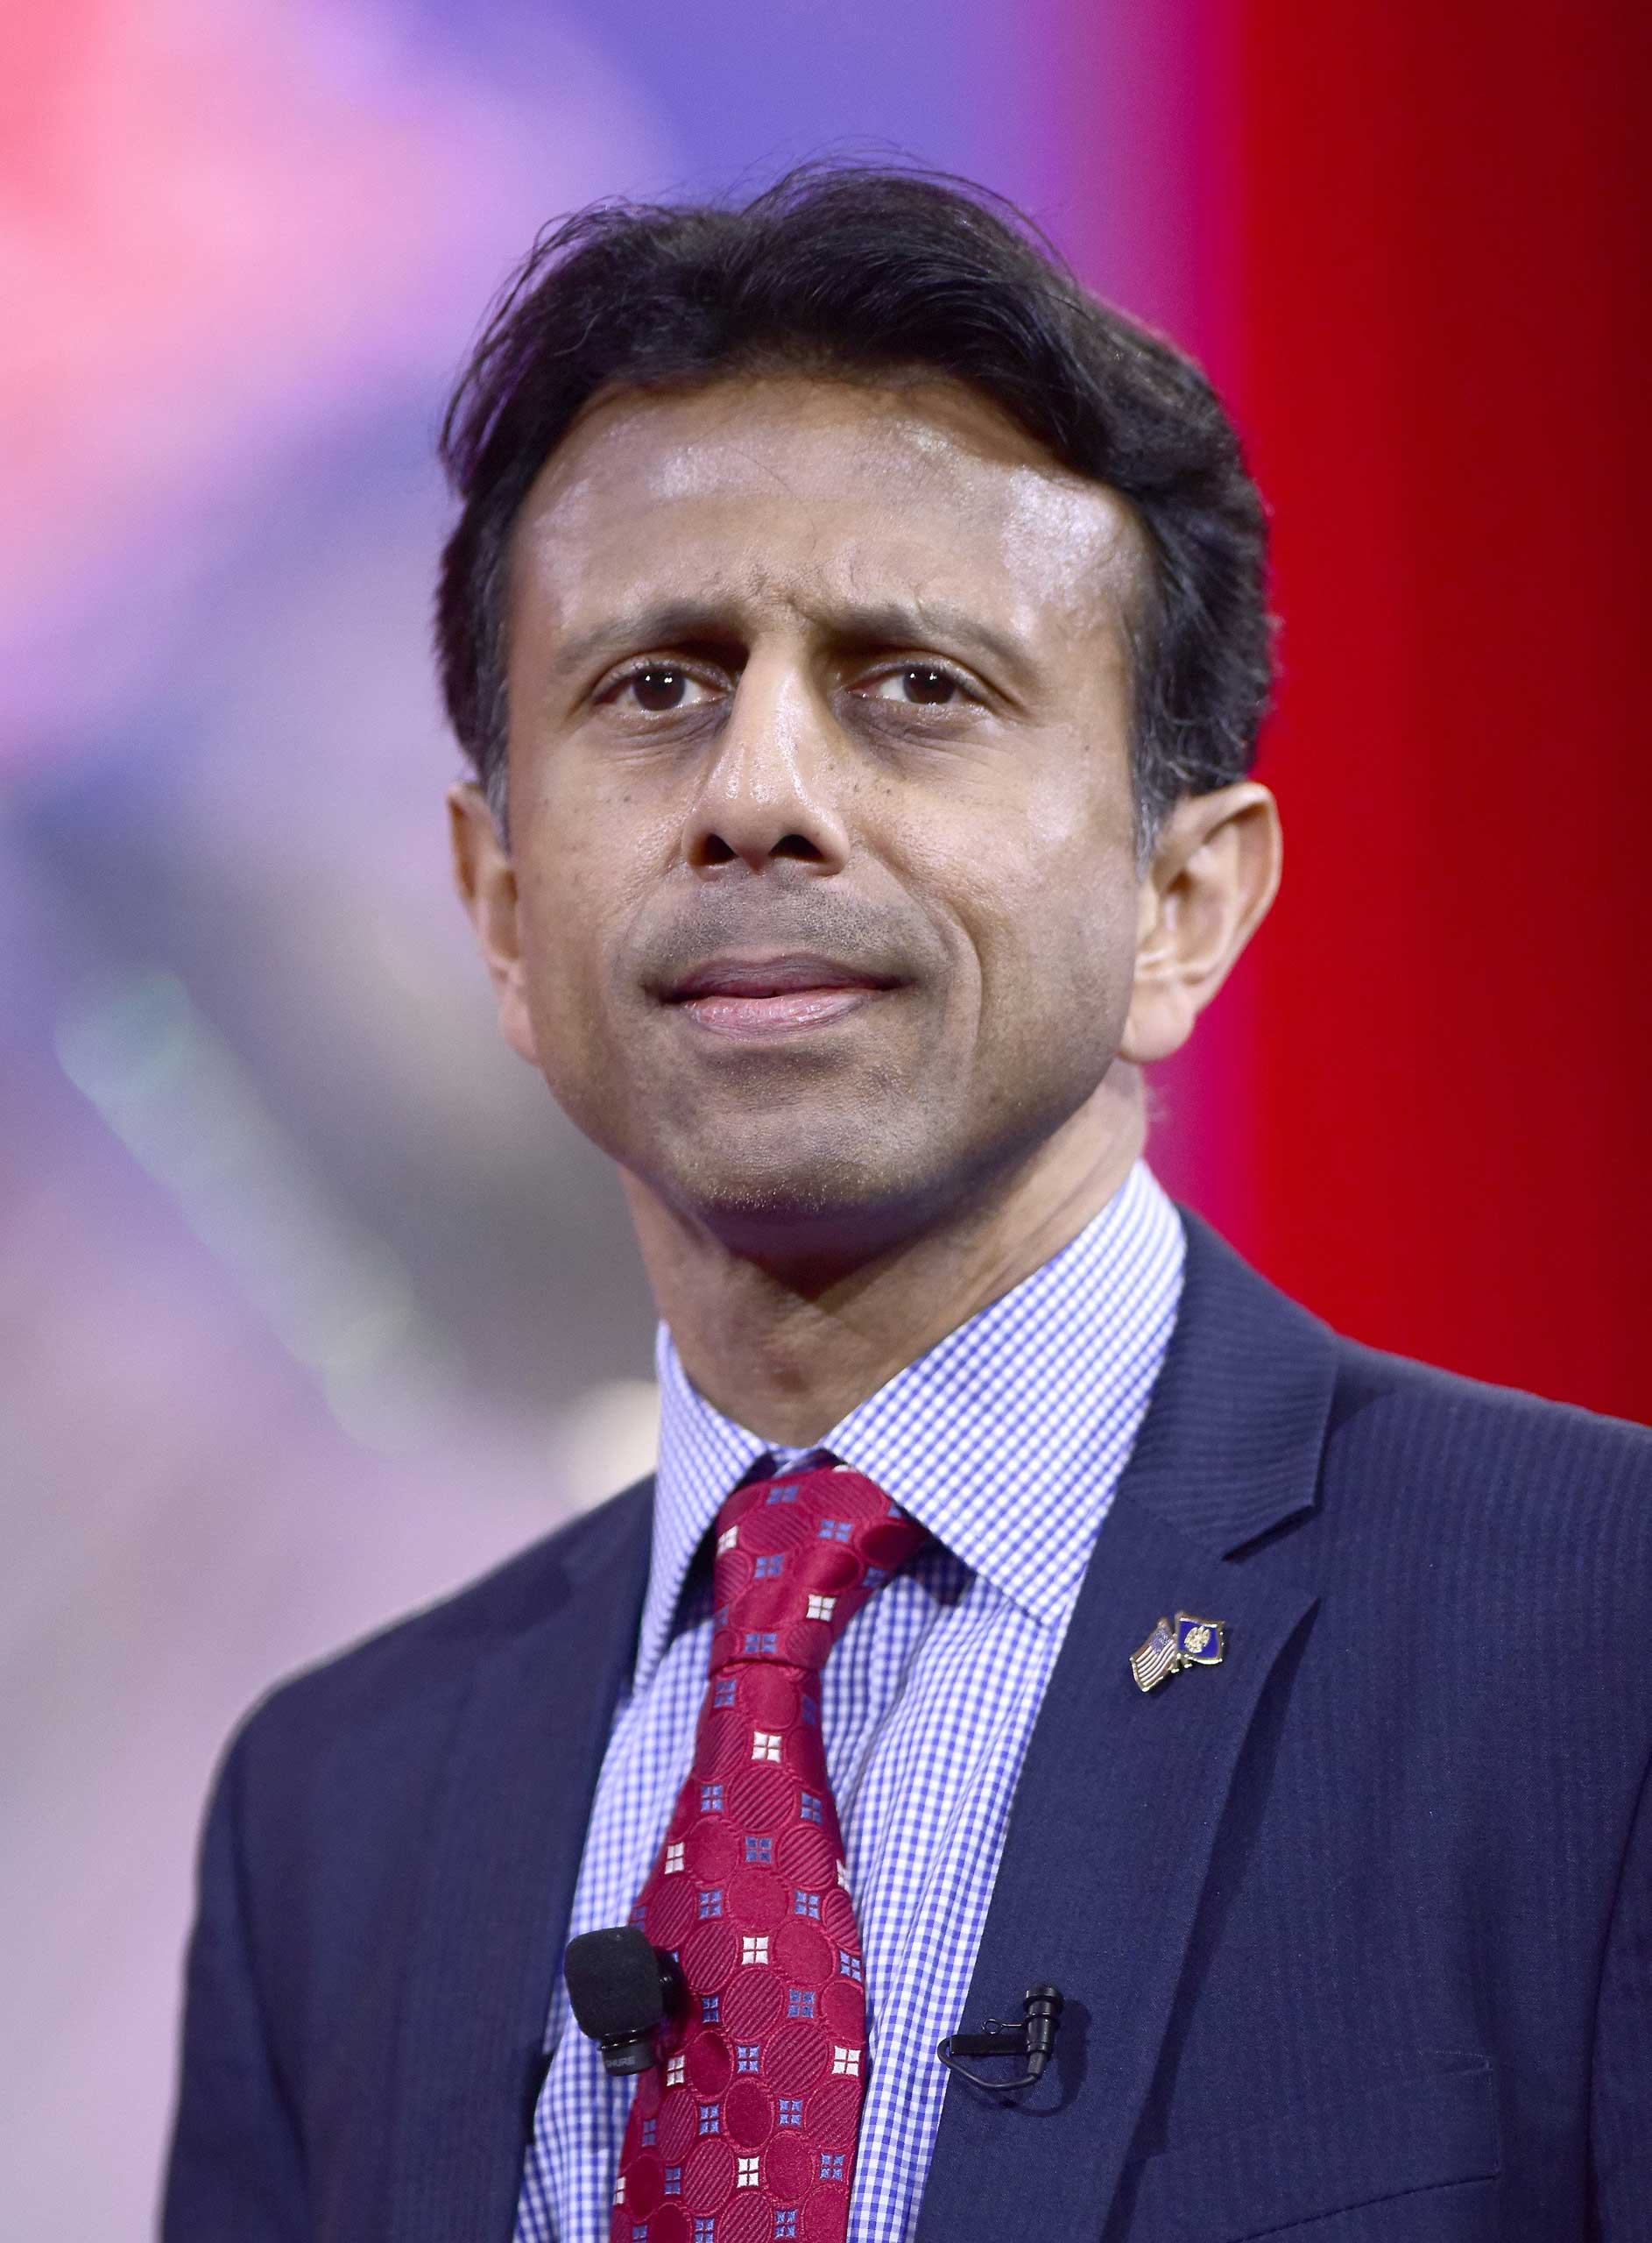 Louisiana Governor Bobby Jindal speaks at the Conservative Political Action Conference (CPAC) in National Harbor, Md. on Feb. 26, 2015.